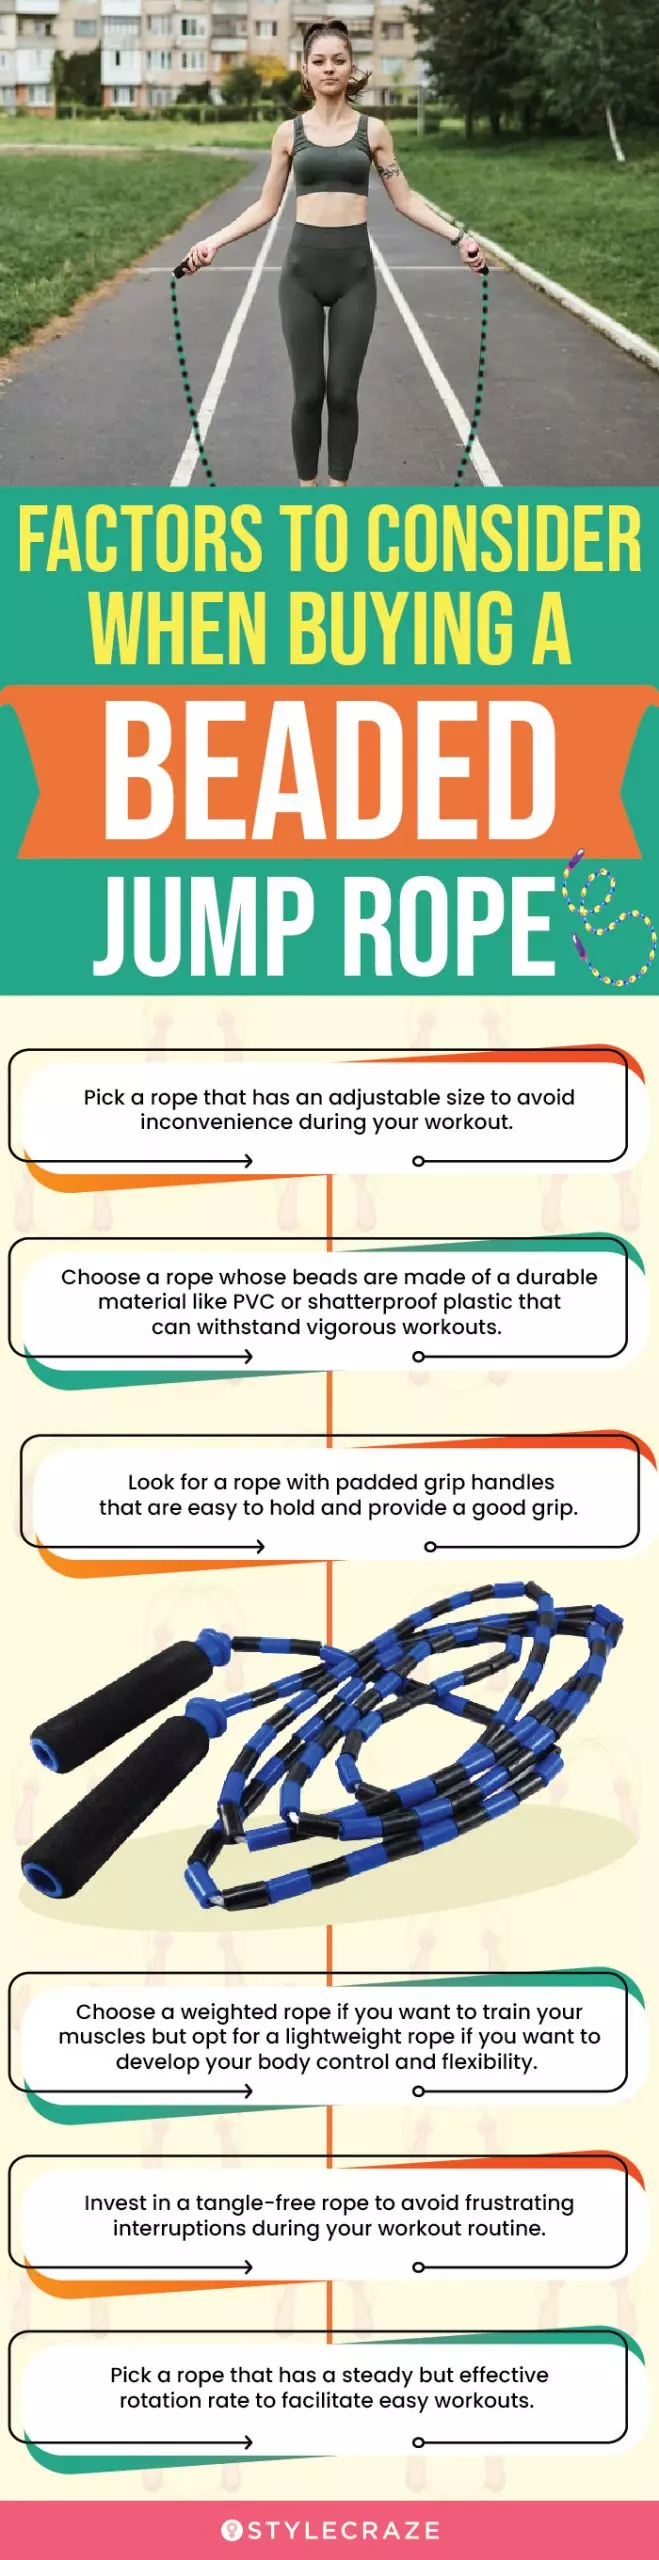  Factors To Consider When Buying A Beaded Jump Rope (infographic)